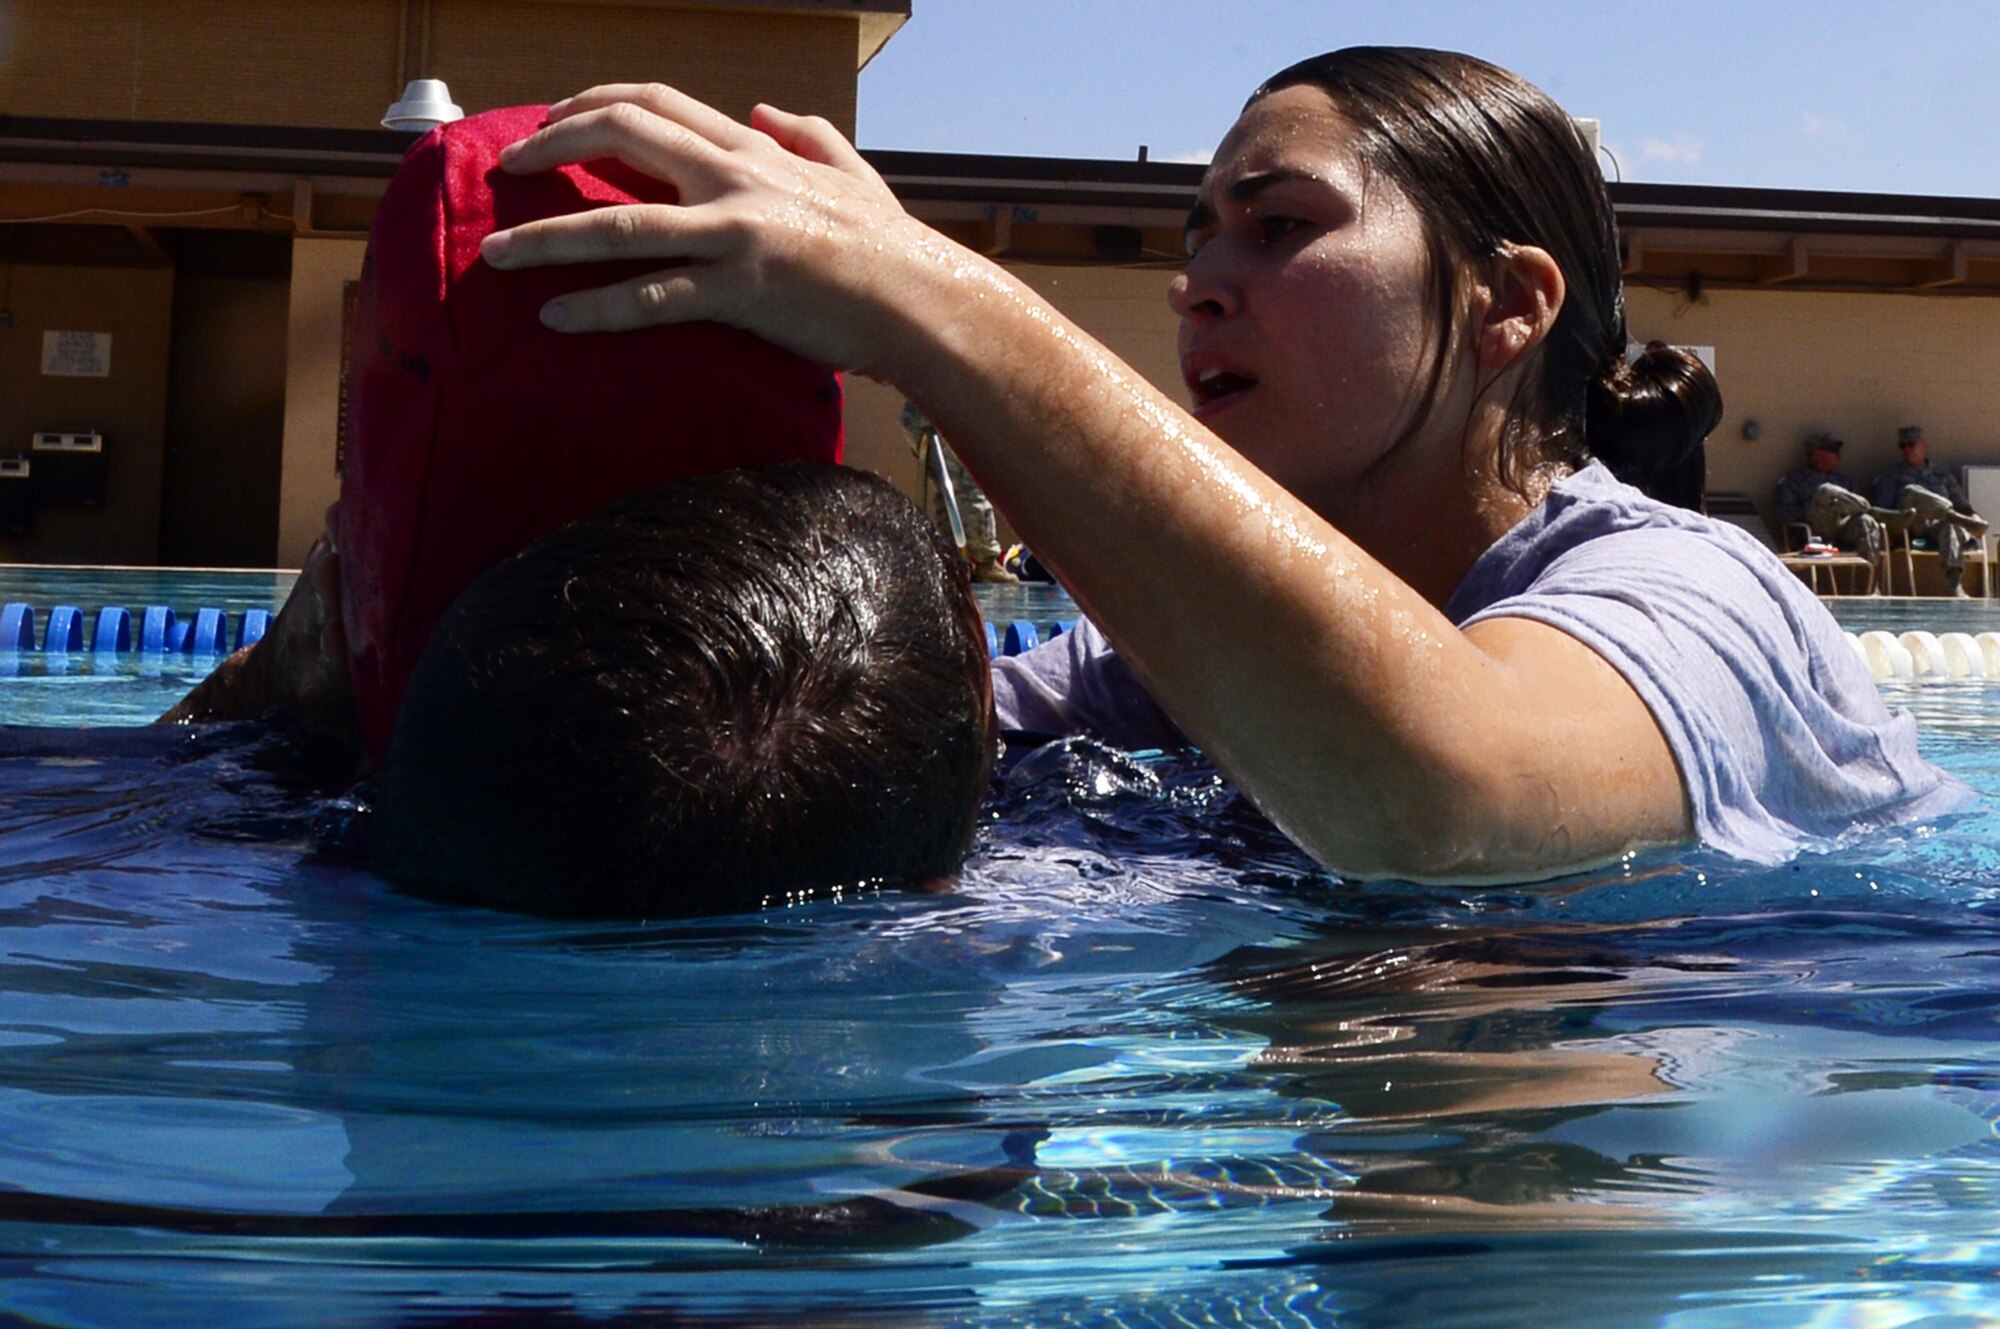 An emergency medical technician assigned to Eglin Air Force Base, Fla., rescue a simulated drowning victim during the 2016 EMT Rodeo Aug. 26, 2016 at Cannon Air Force Base, N.M. Cannon’s EMT Rodeo tests the skills of medical professionals from across the Air Force through a series of innovative, high-pressure scenarios. (U.S. Air Force photo by Tech. Sgt. Manuel J. Martinez)